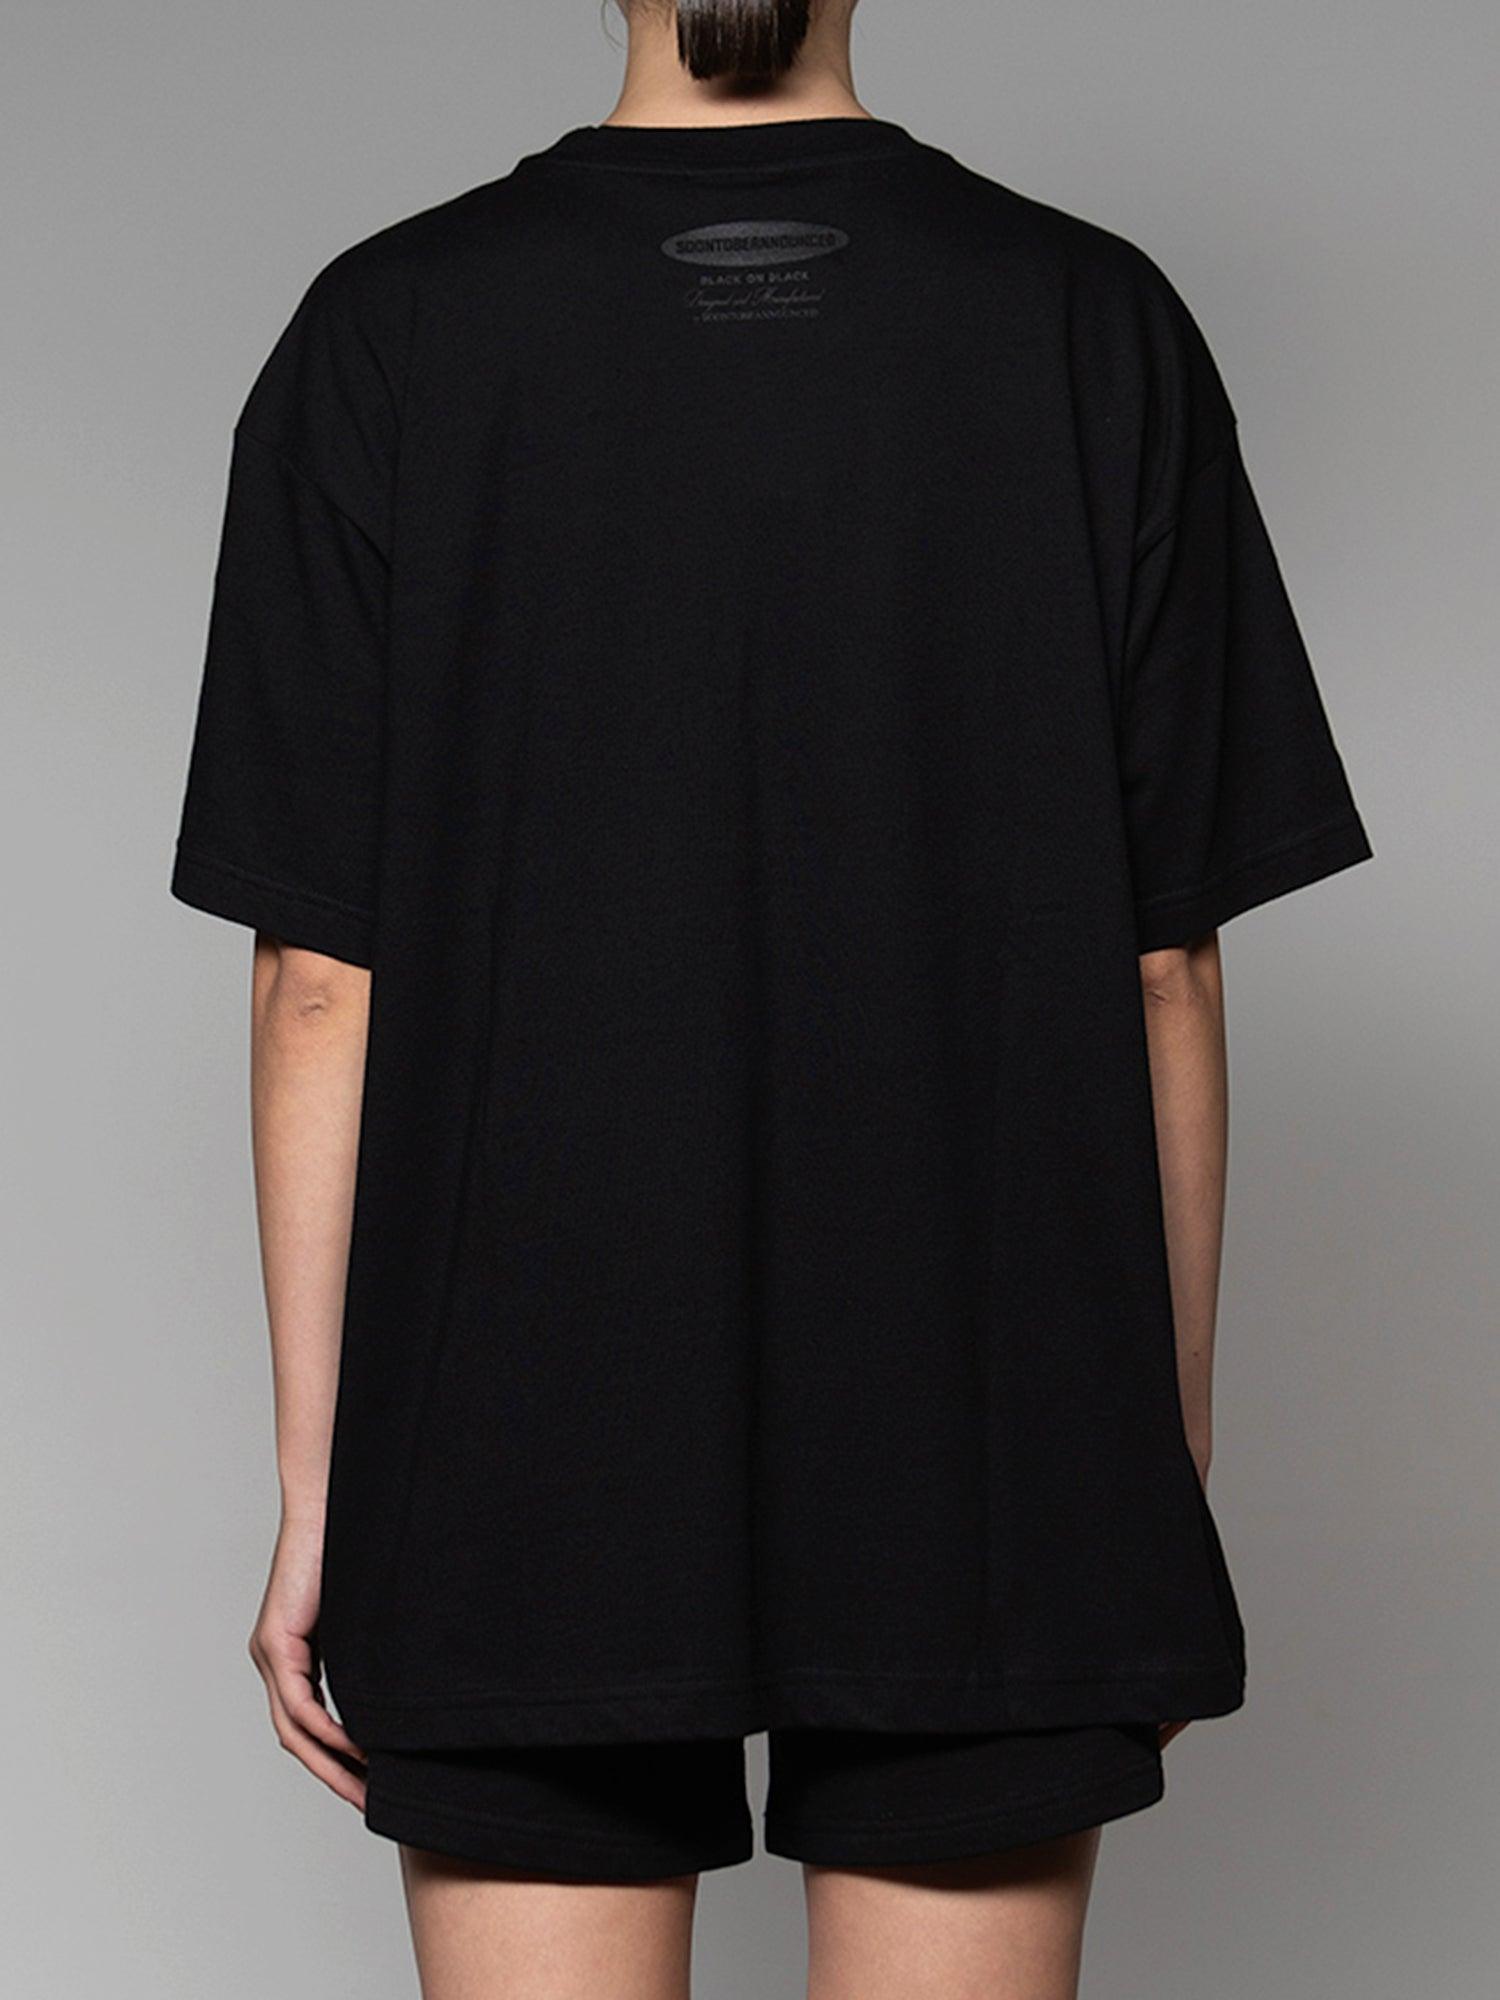 Black on Black S/S T-Shirt - SOON TO BE ANNOUNCED